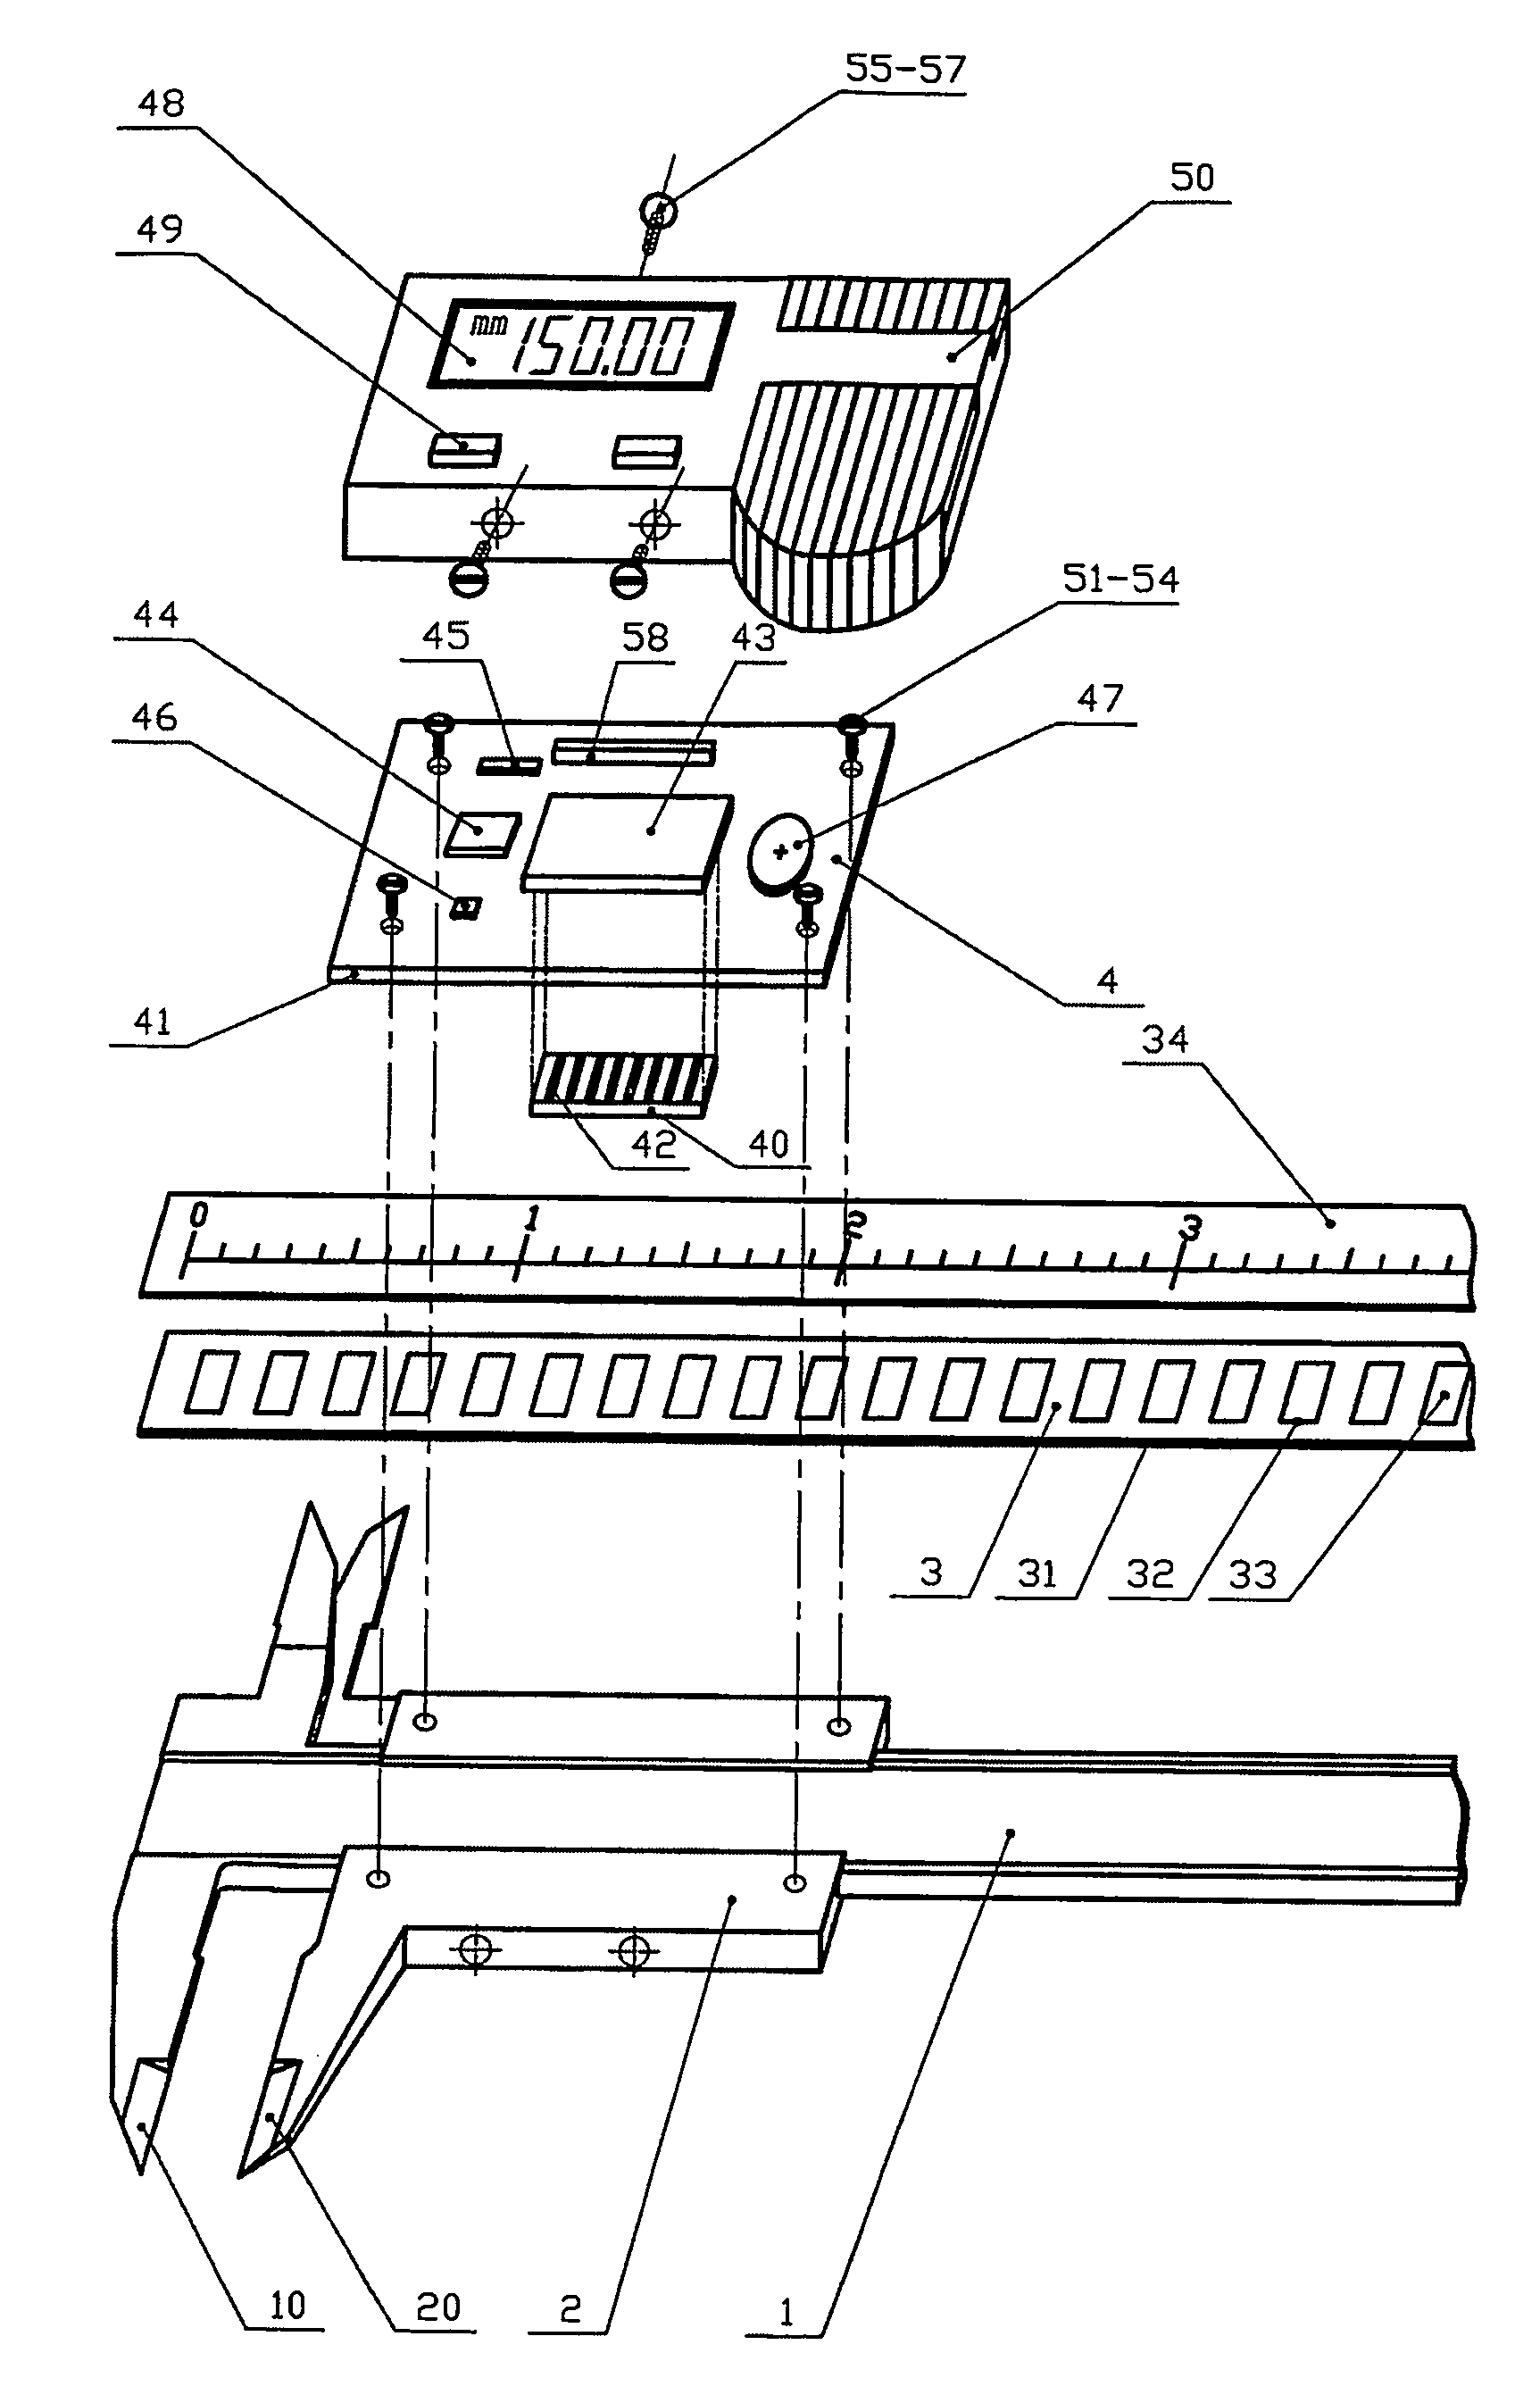 Magnetic displacement measurement device